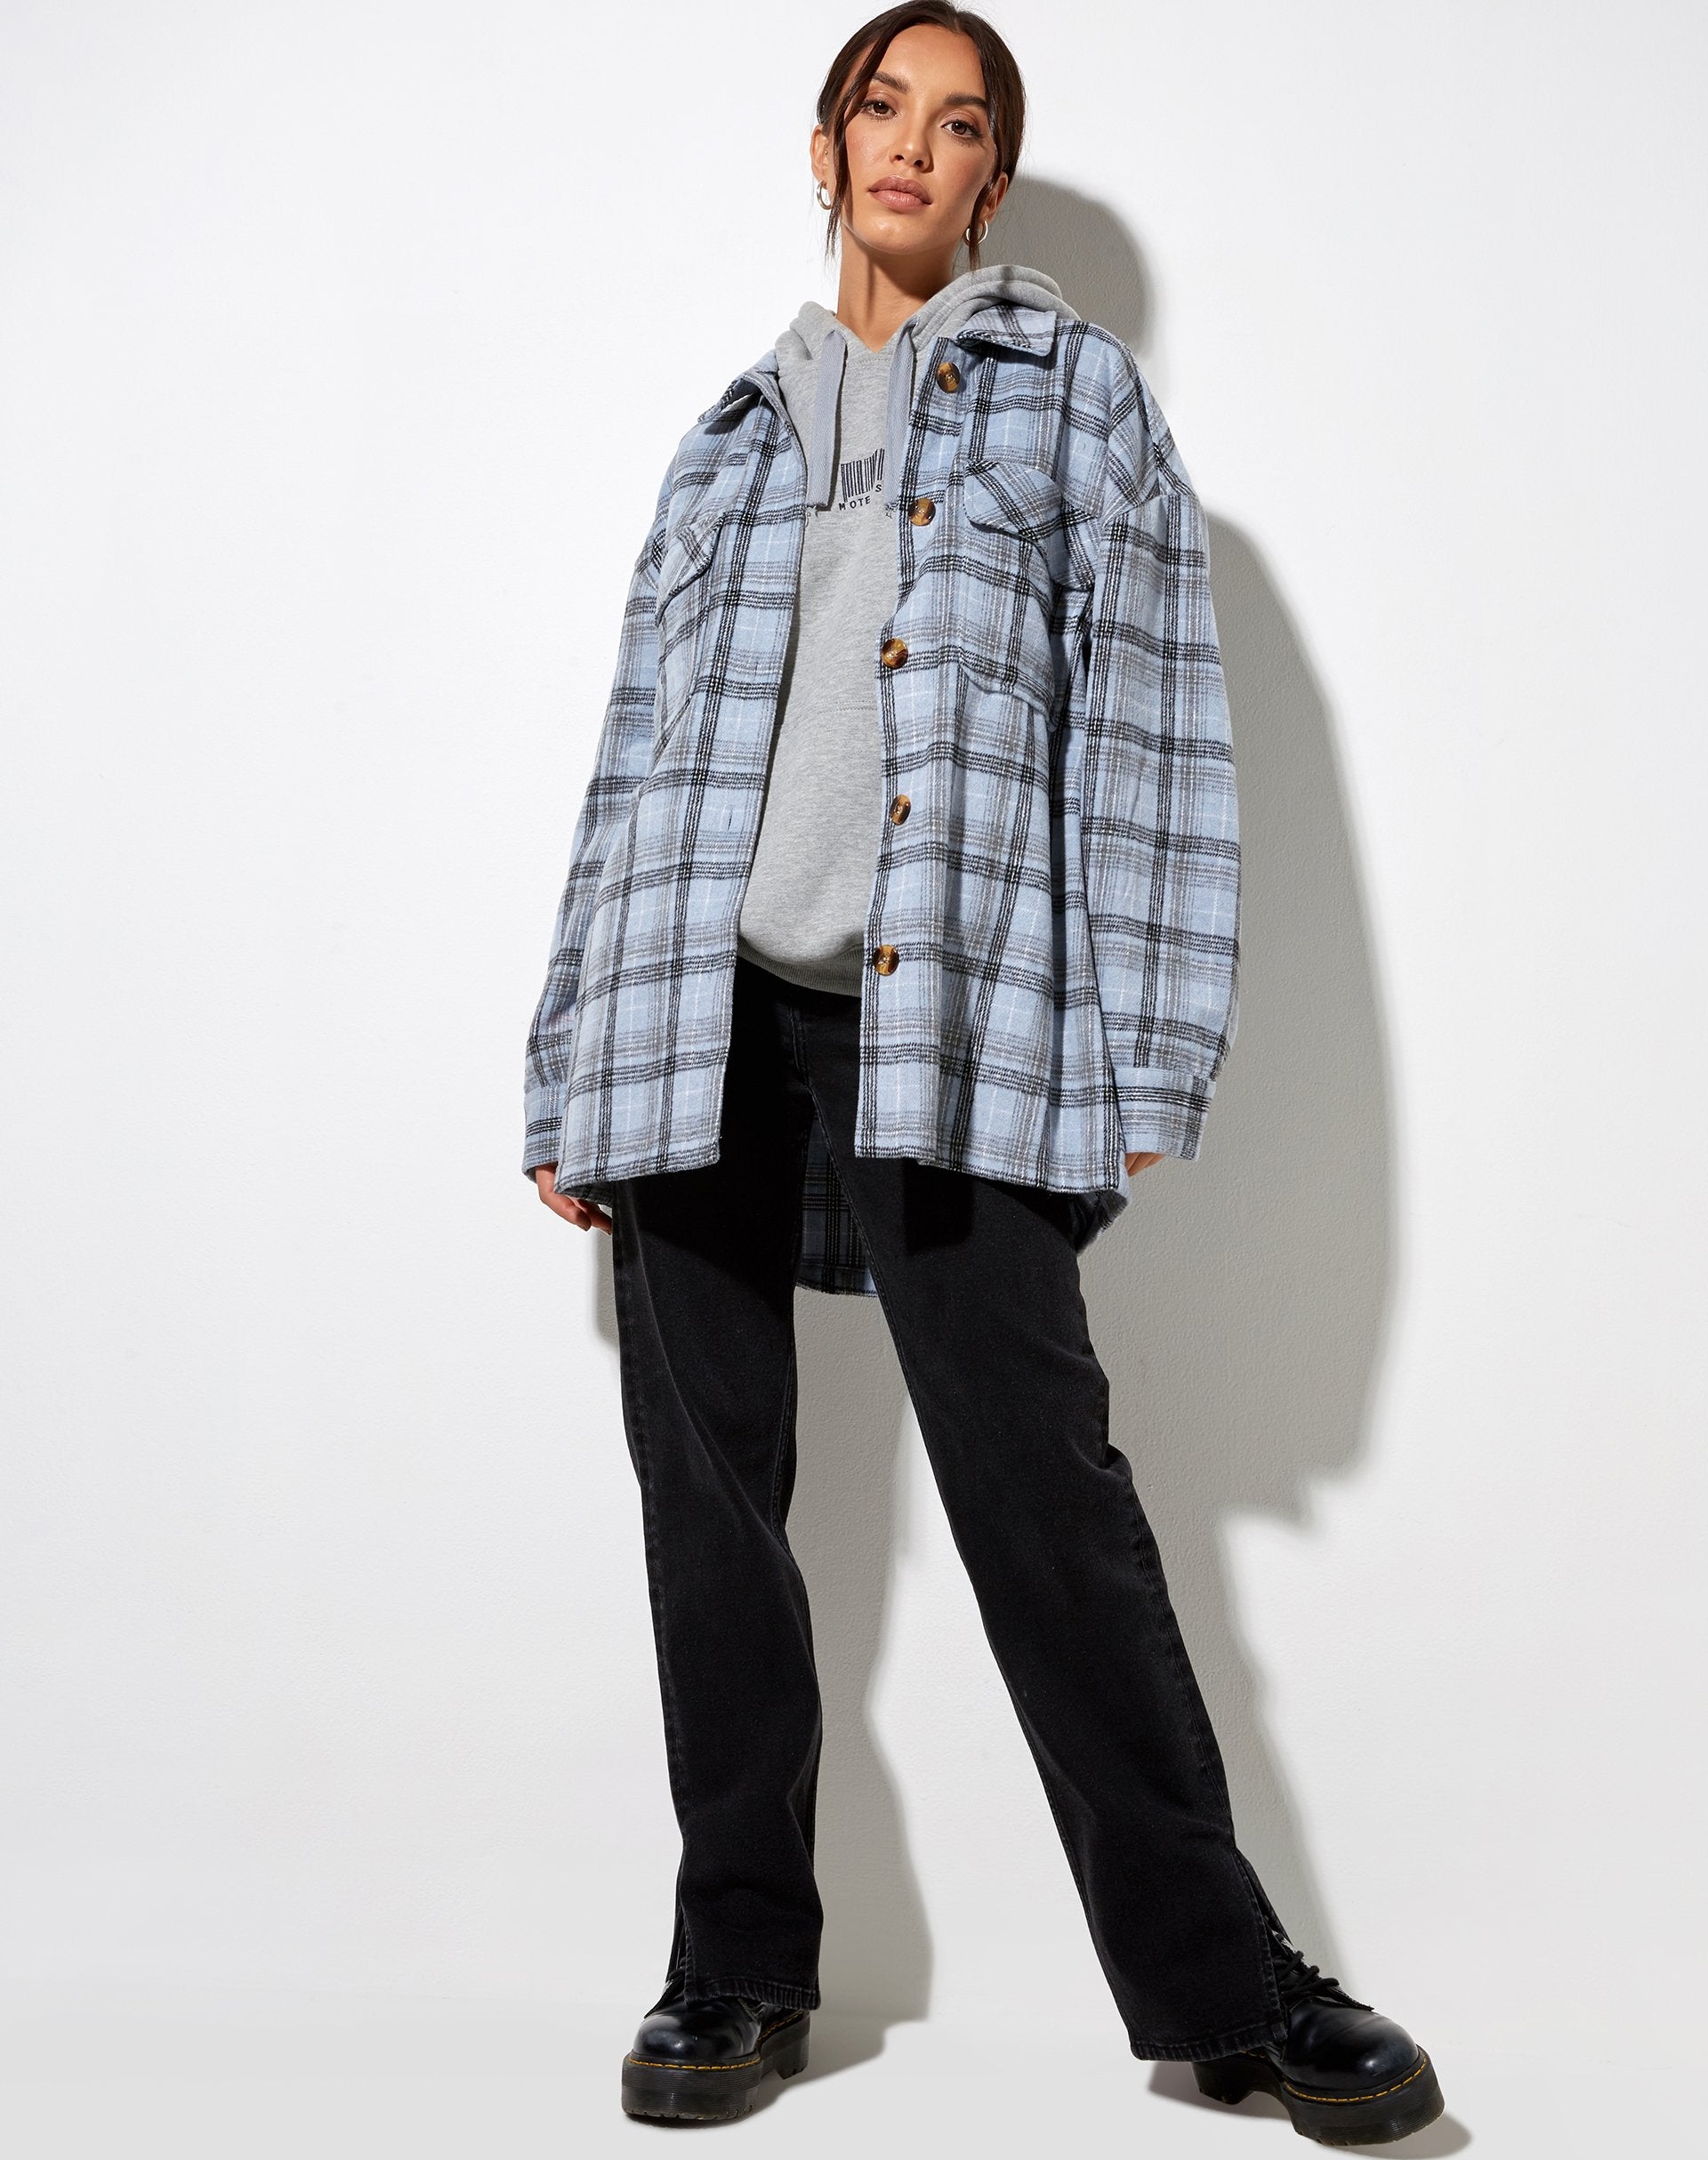 Image of Marcella Shirt in Blue and Black Check